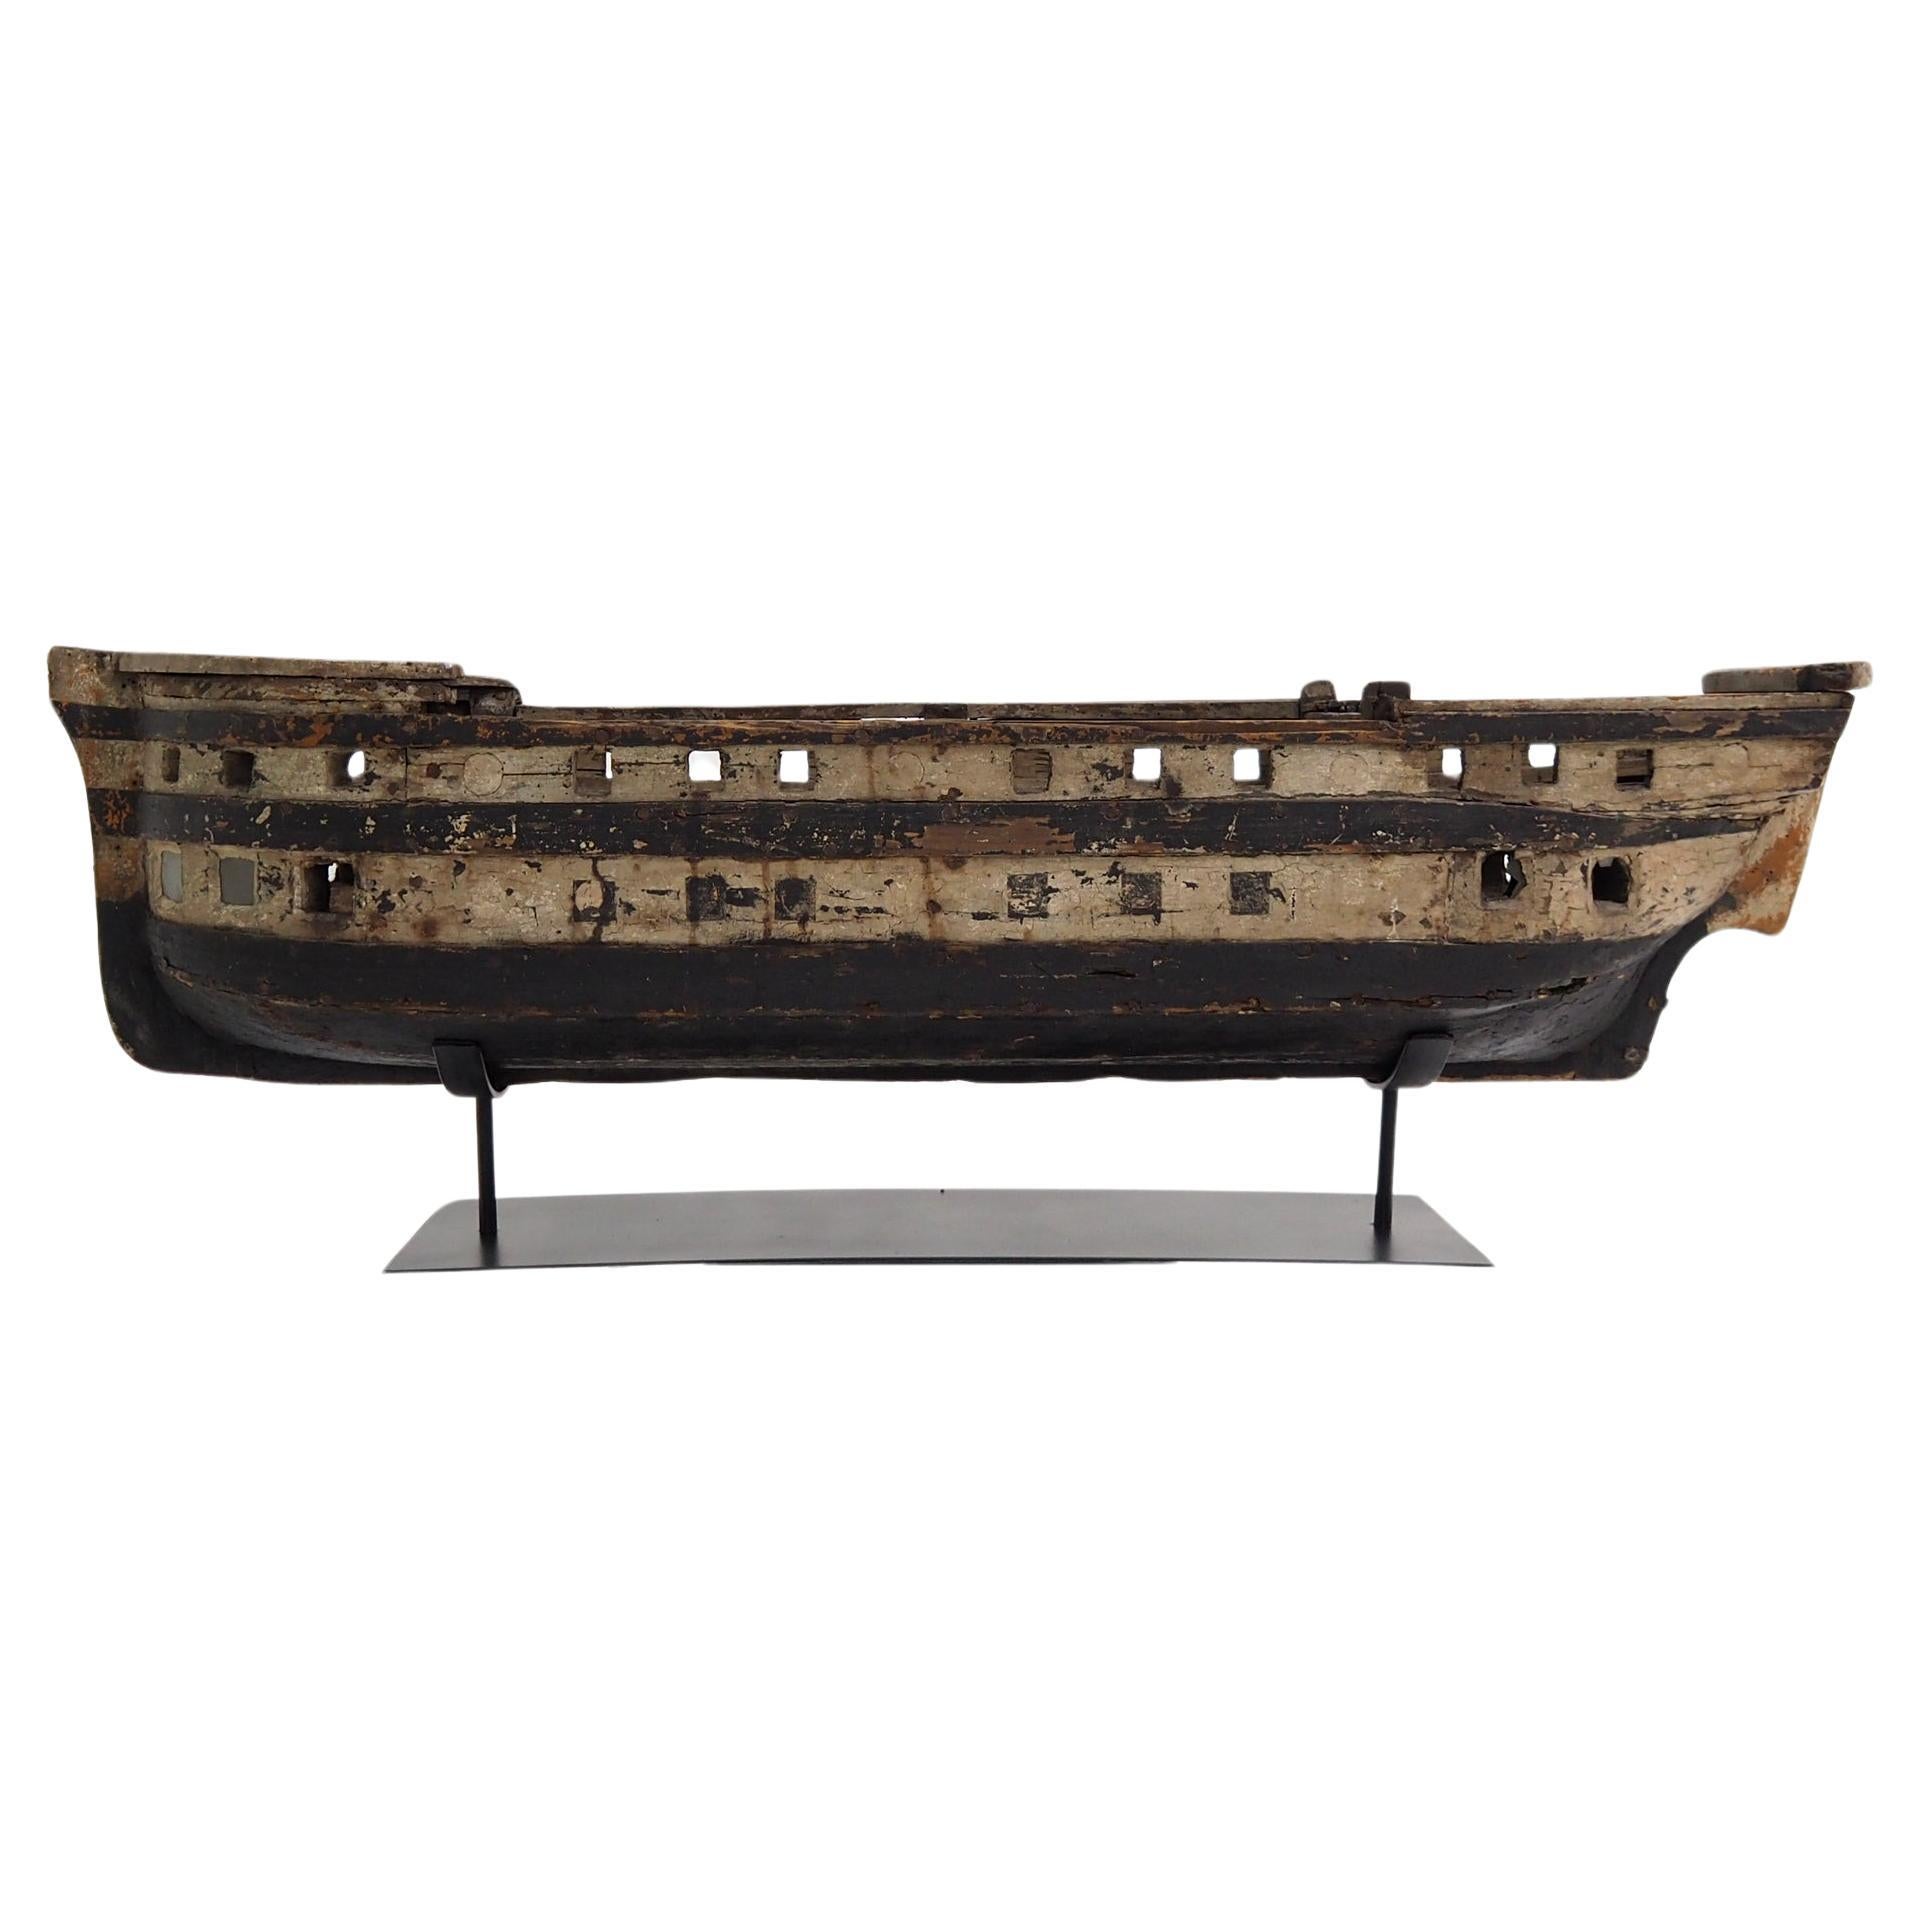 Very Decorative Antique Ship Model with Beautiful Wear and Tear For Sale